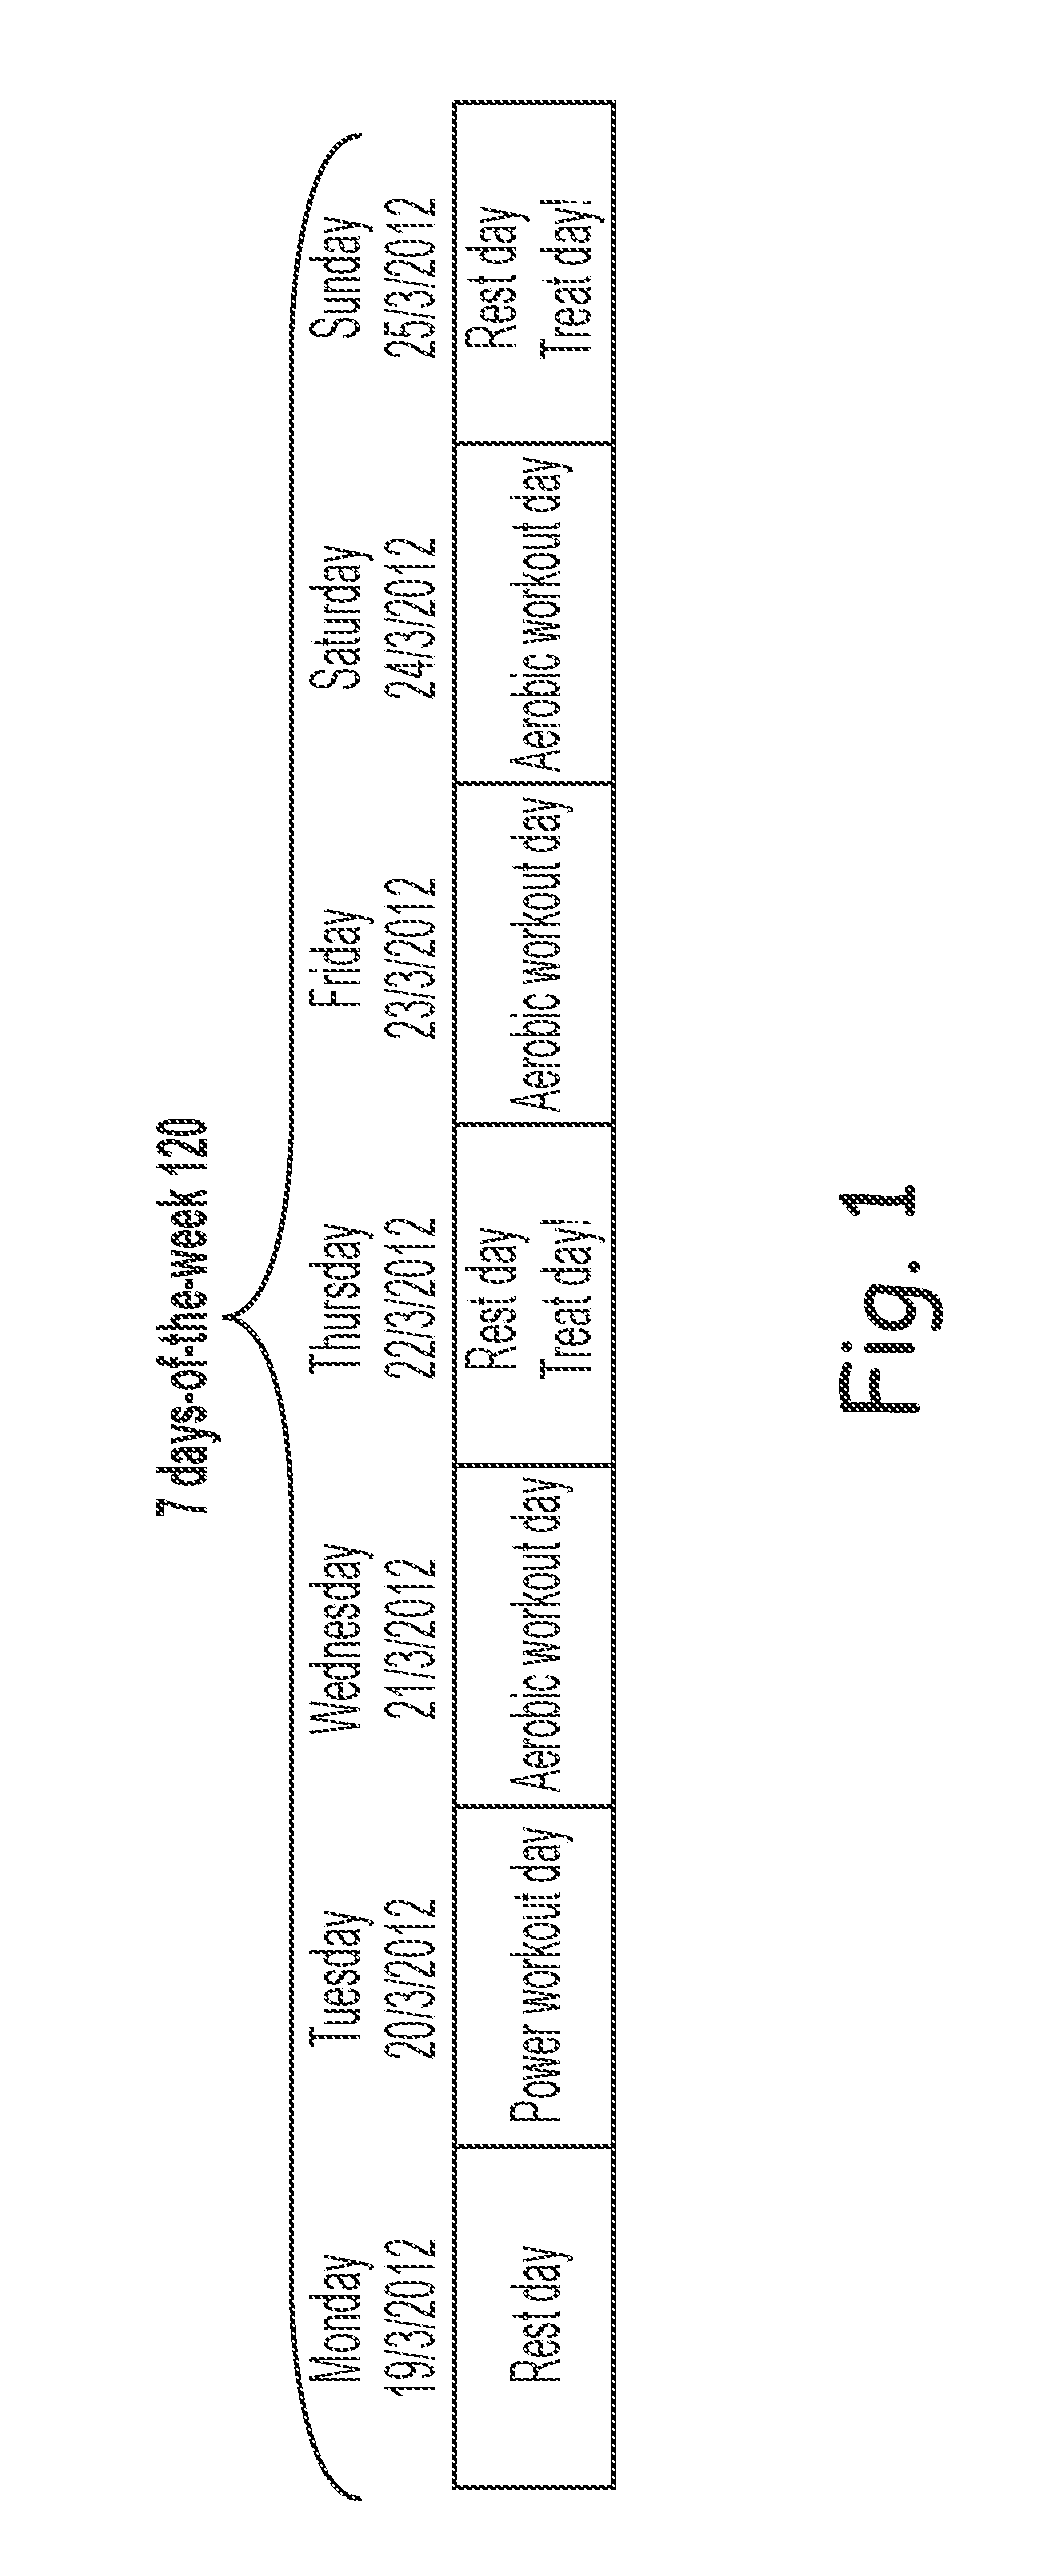 Systems and methods for generating personalized nutritional recommendations